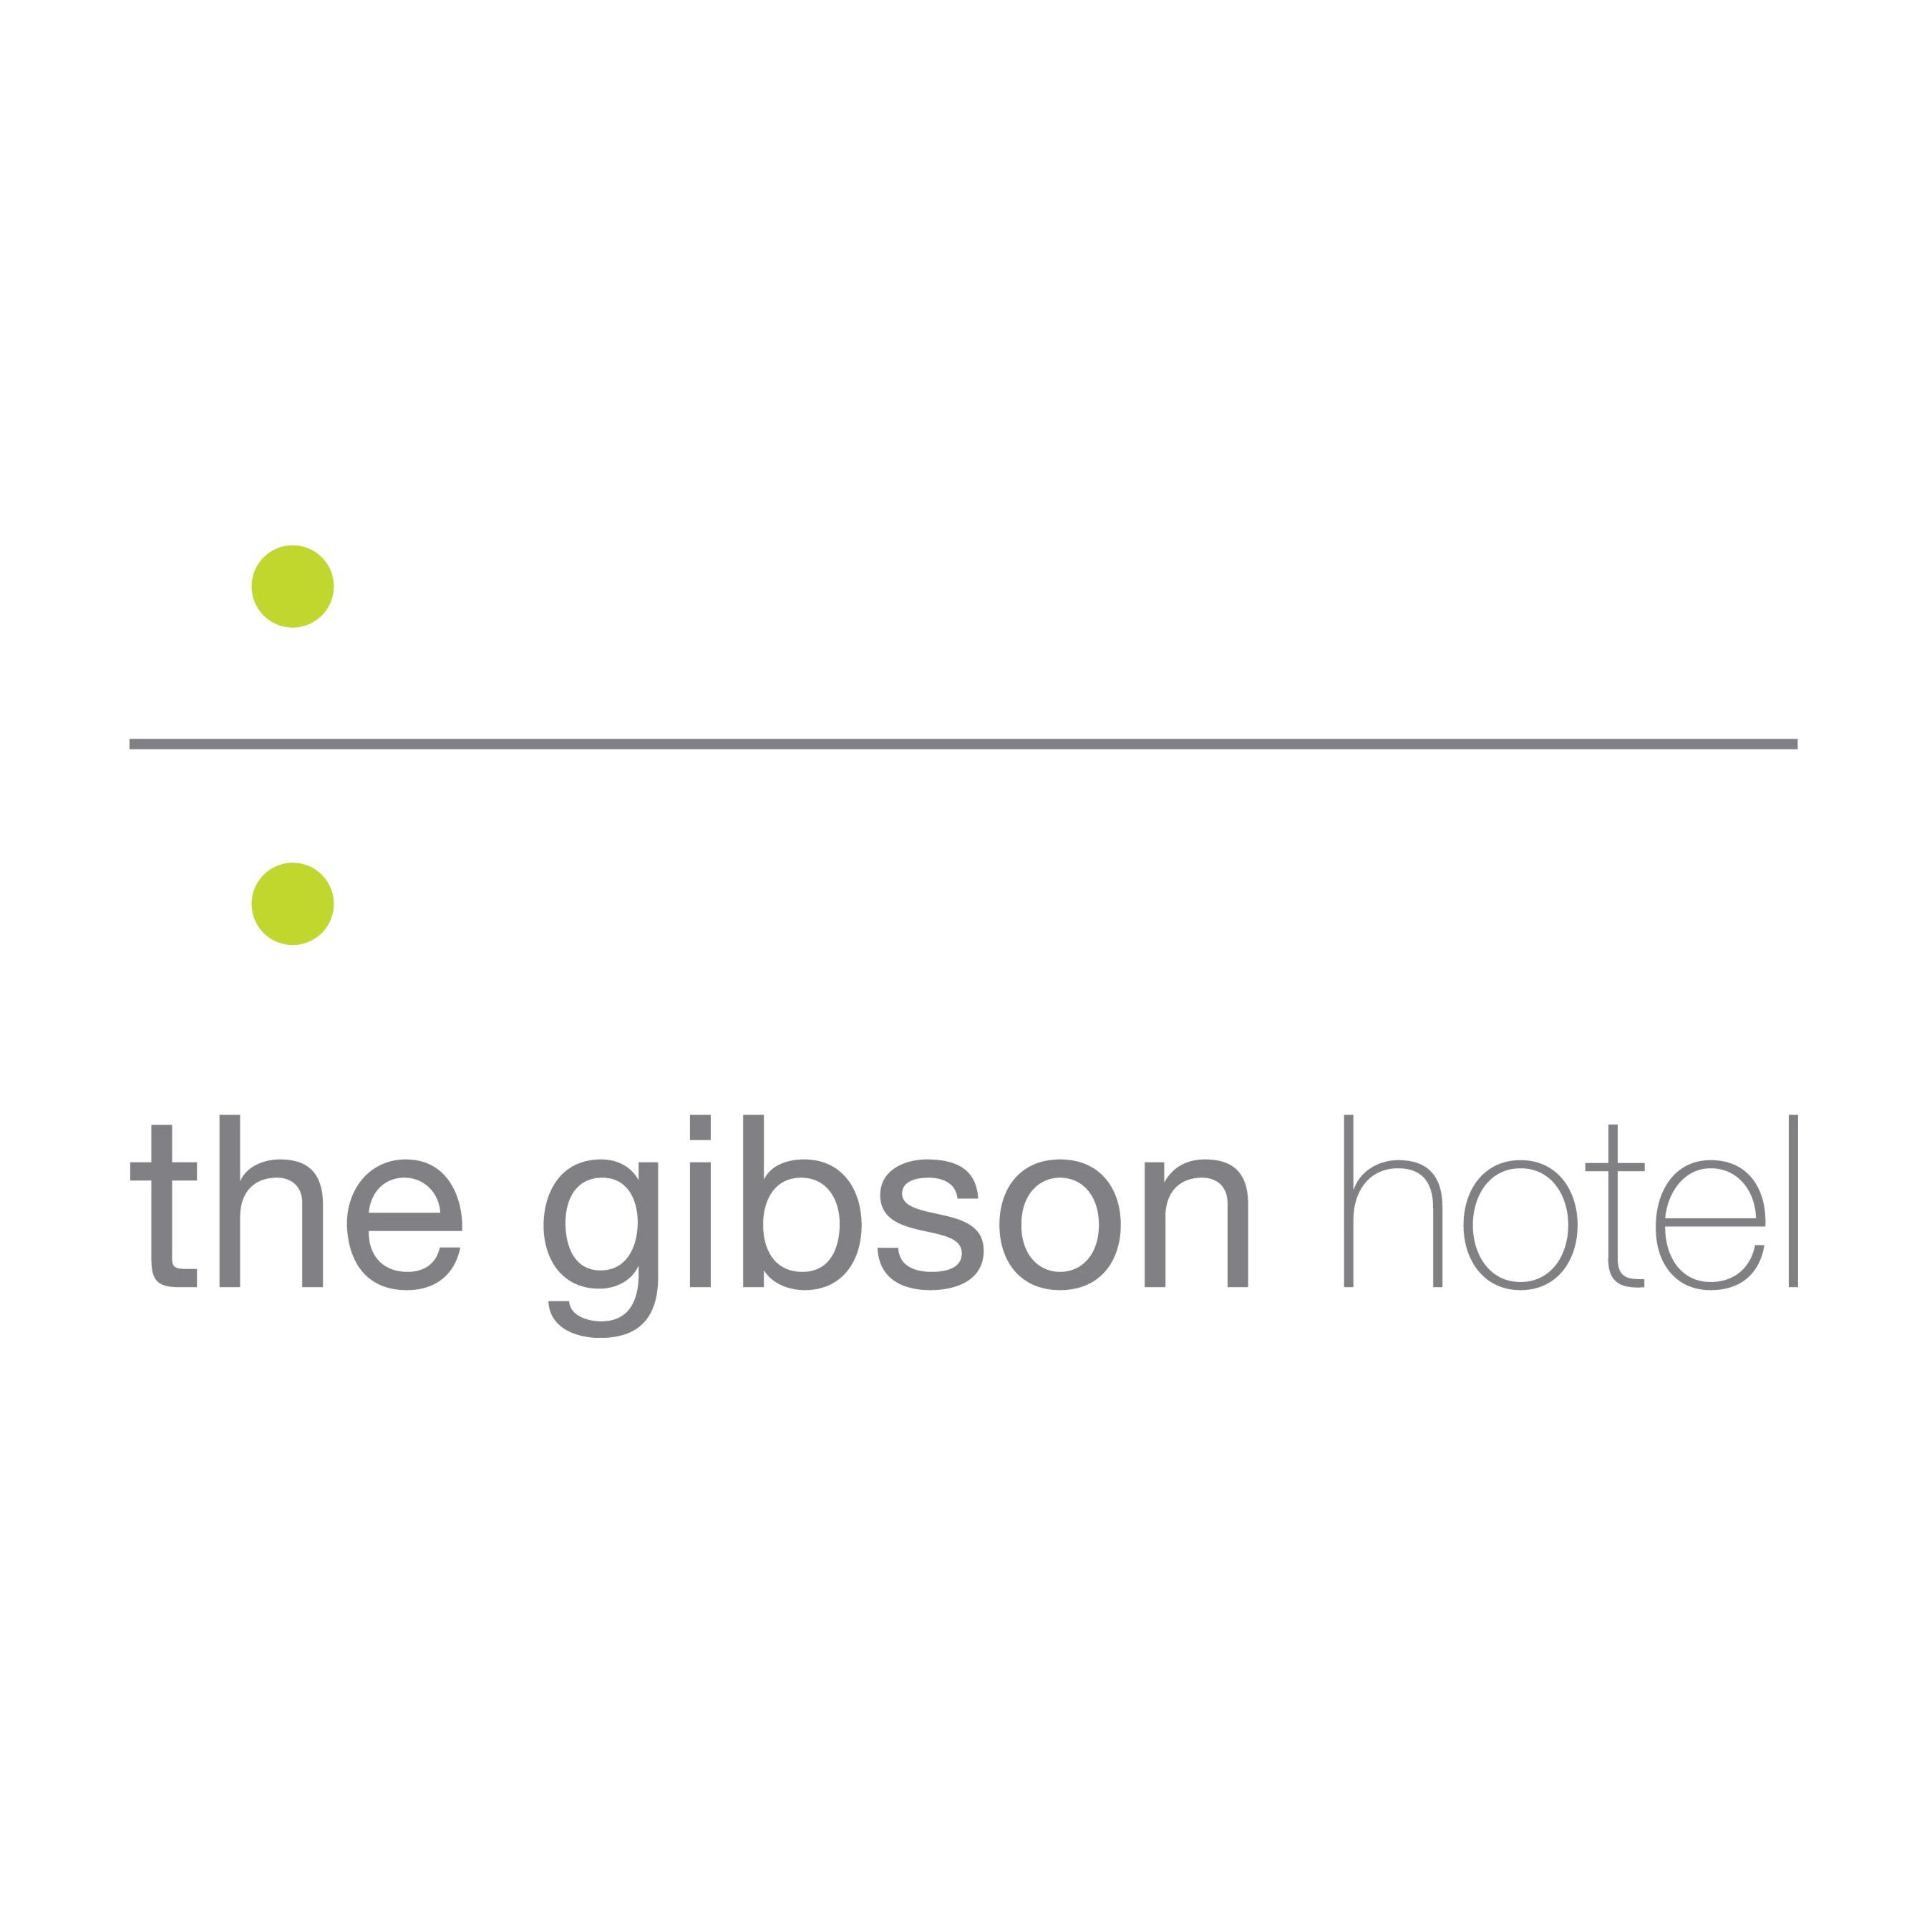 the gibson hotel